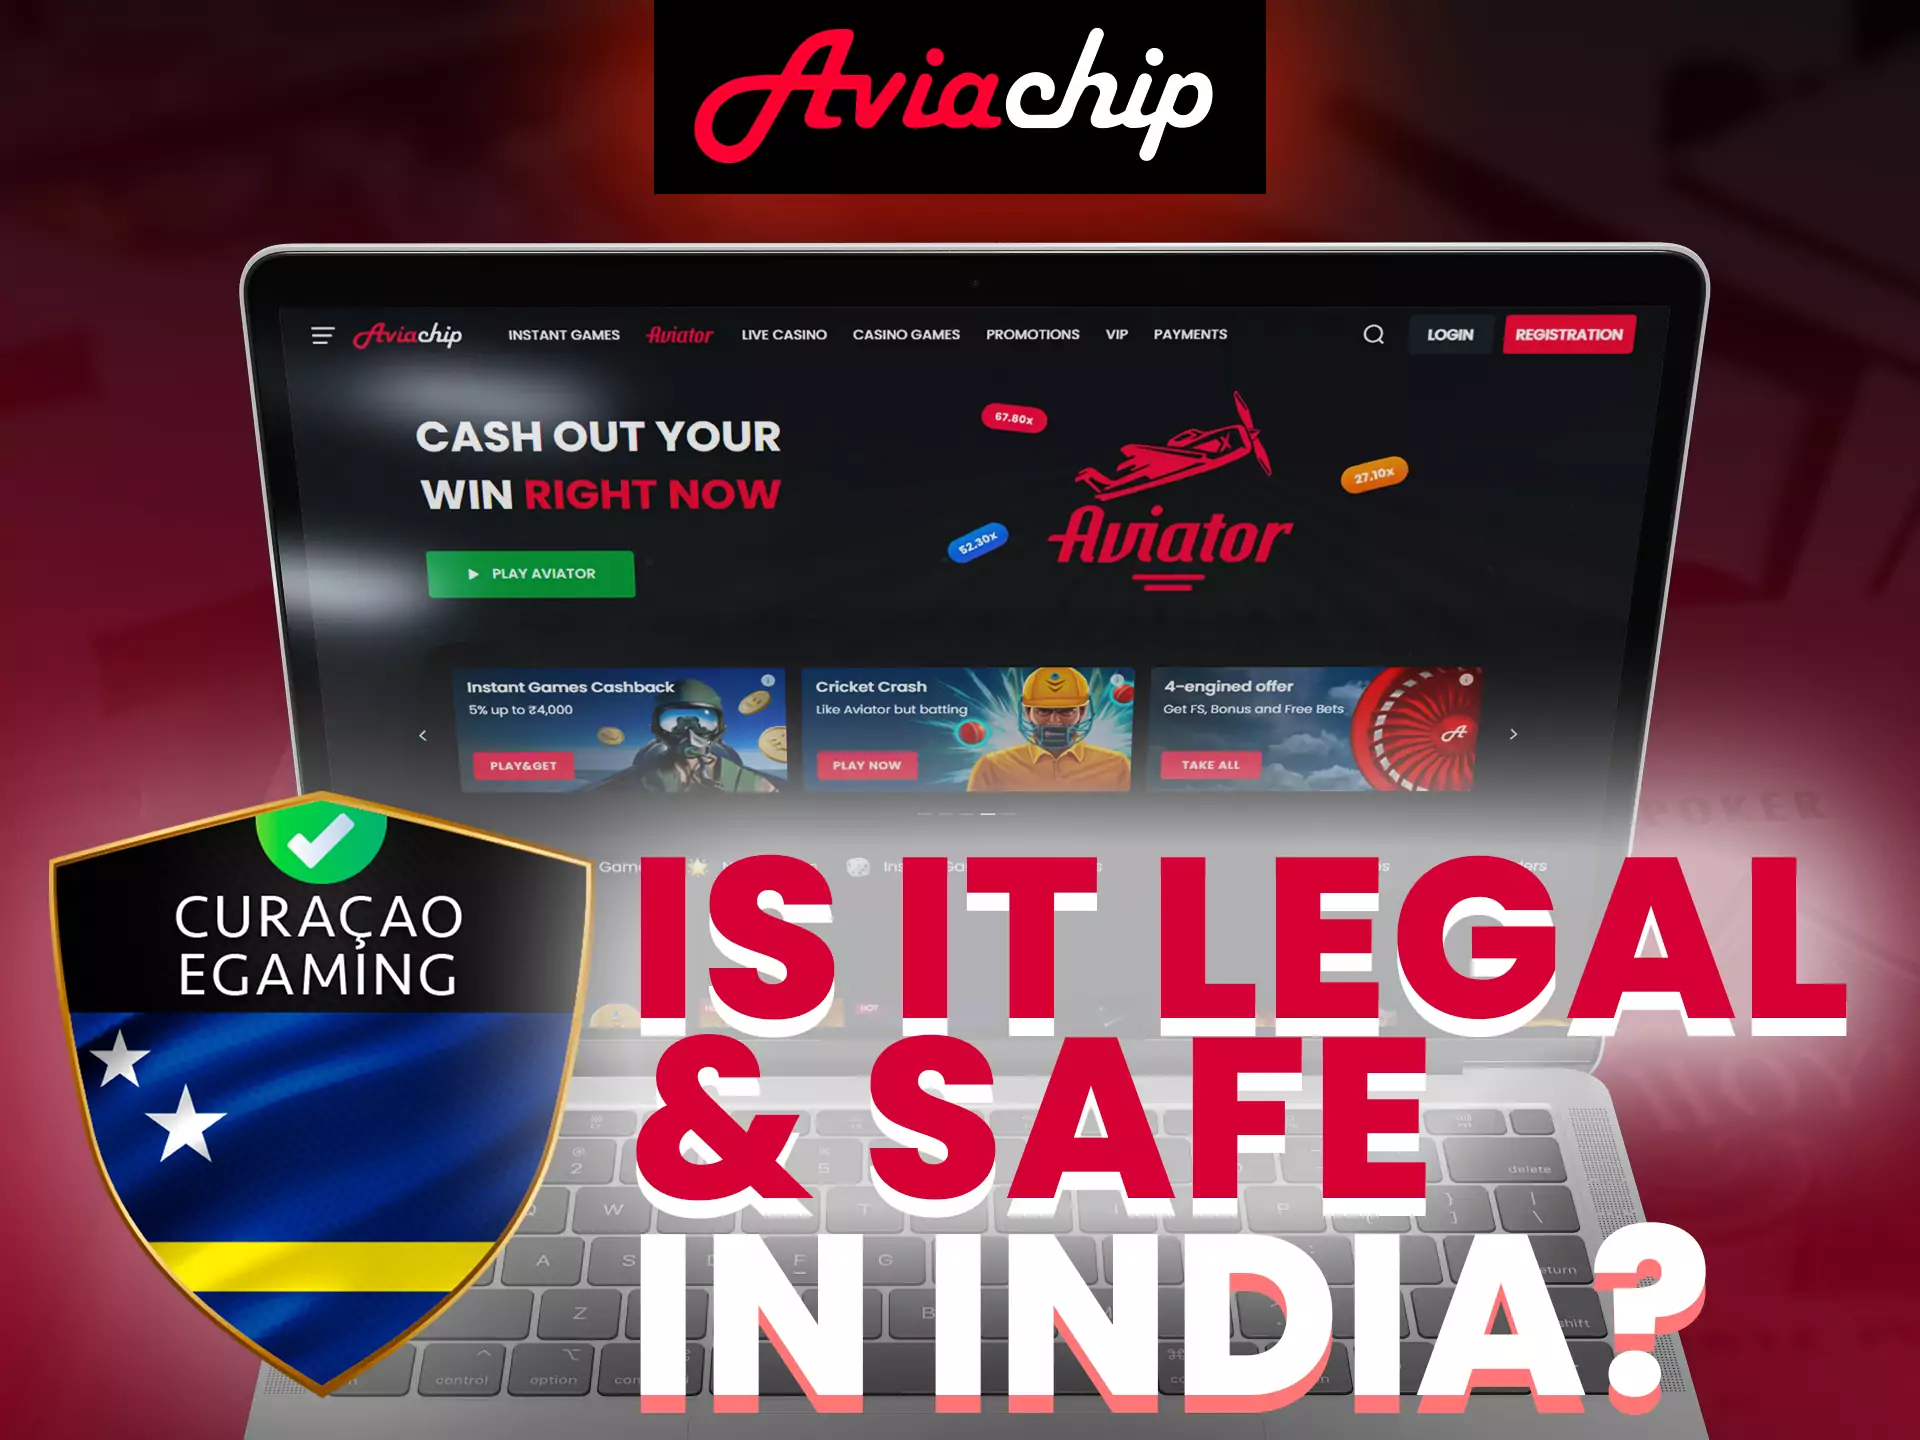 Aviachip is legal and absolutely safe for users.